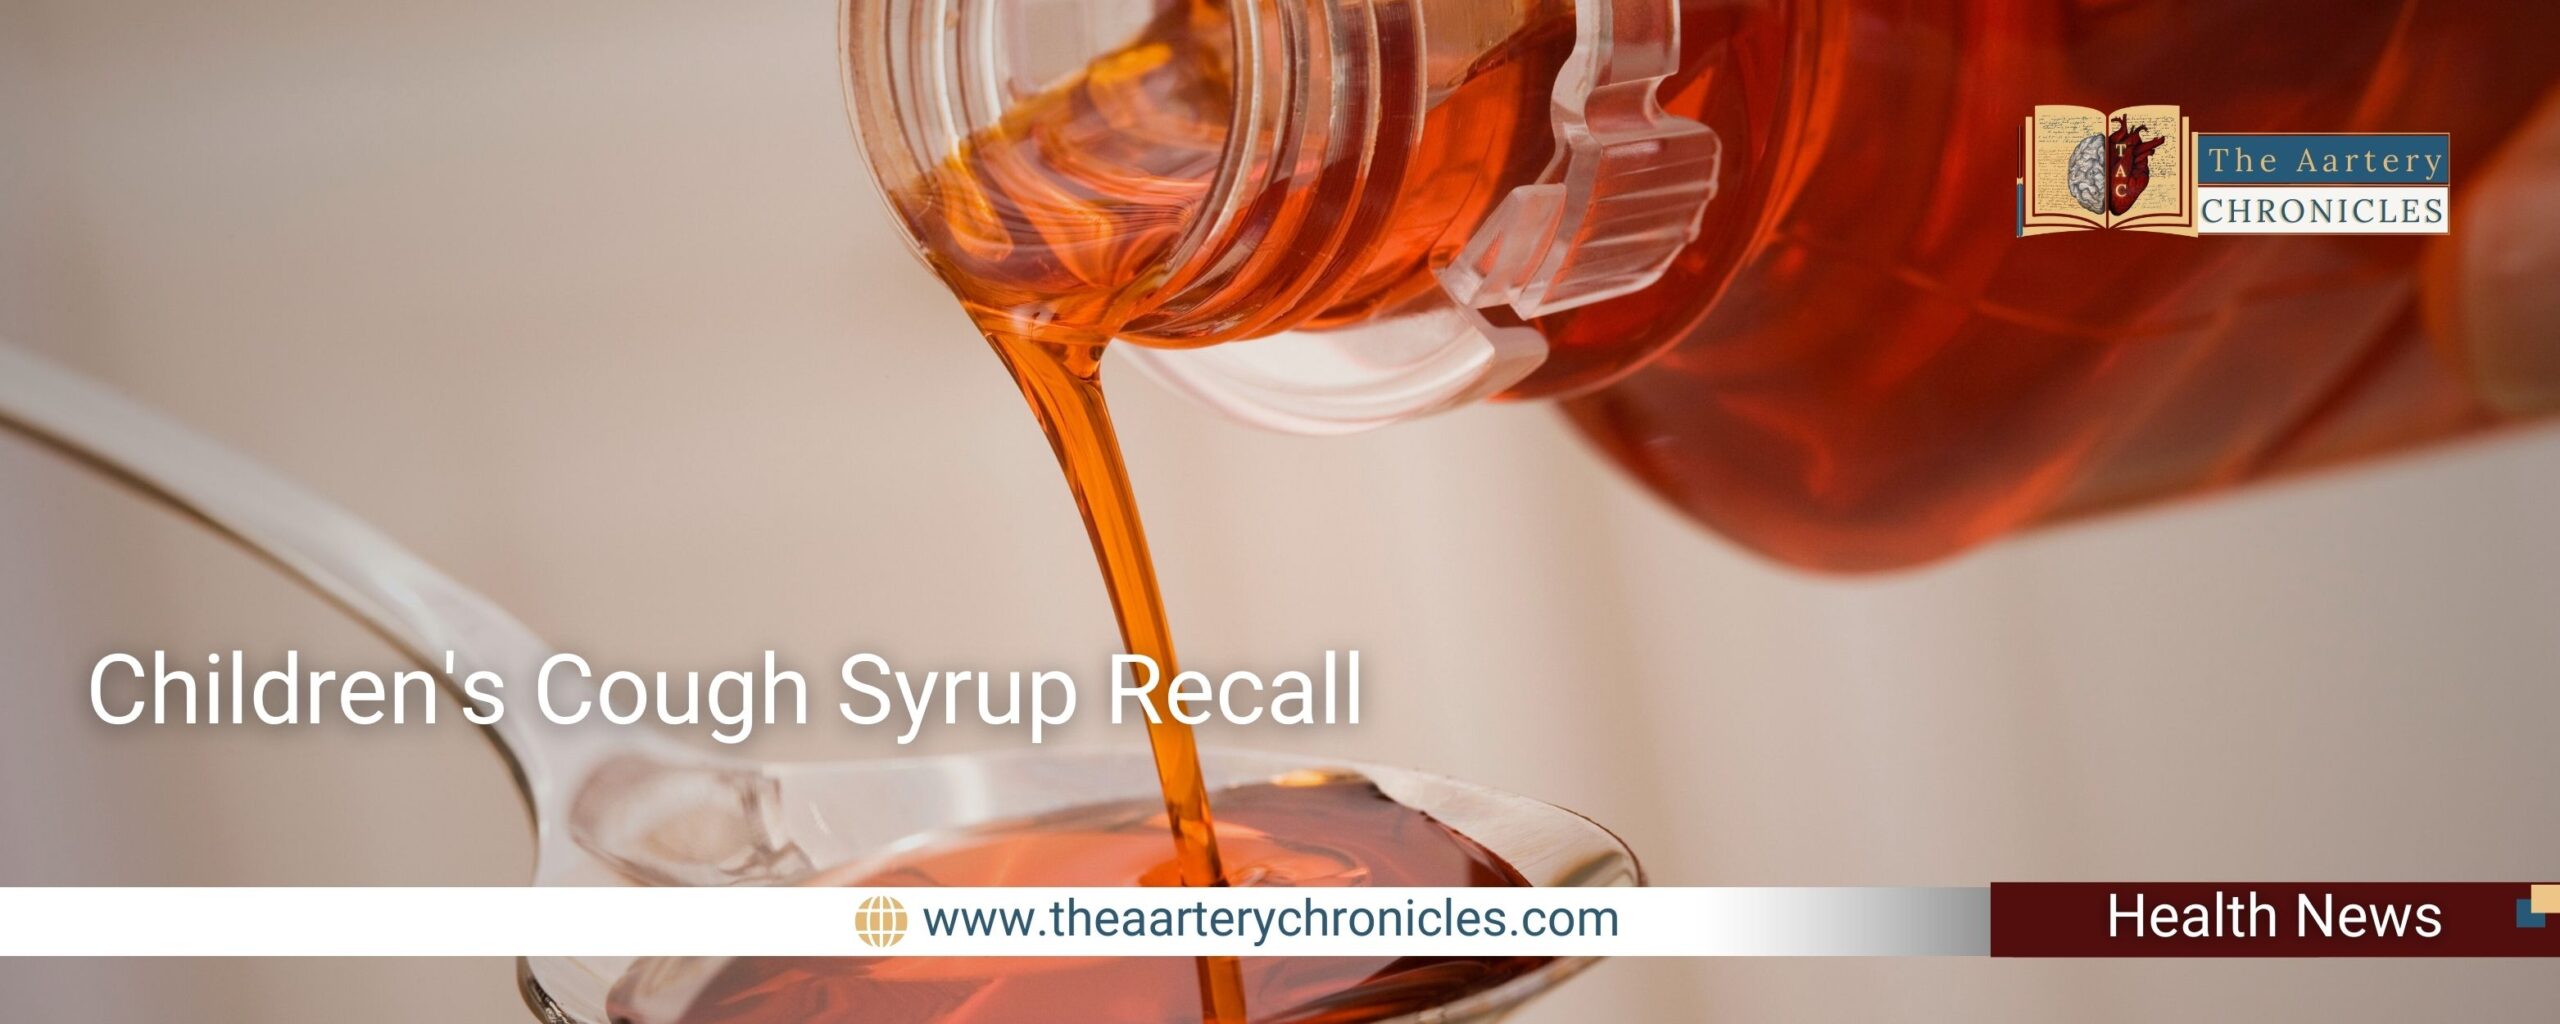 Children's-Cough -syrup-Recall-the-aartery-chronicles-tac